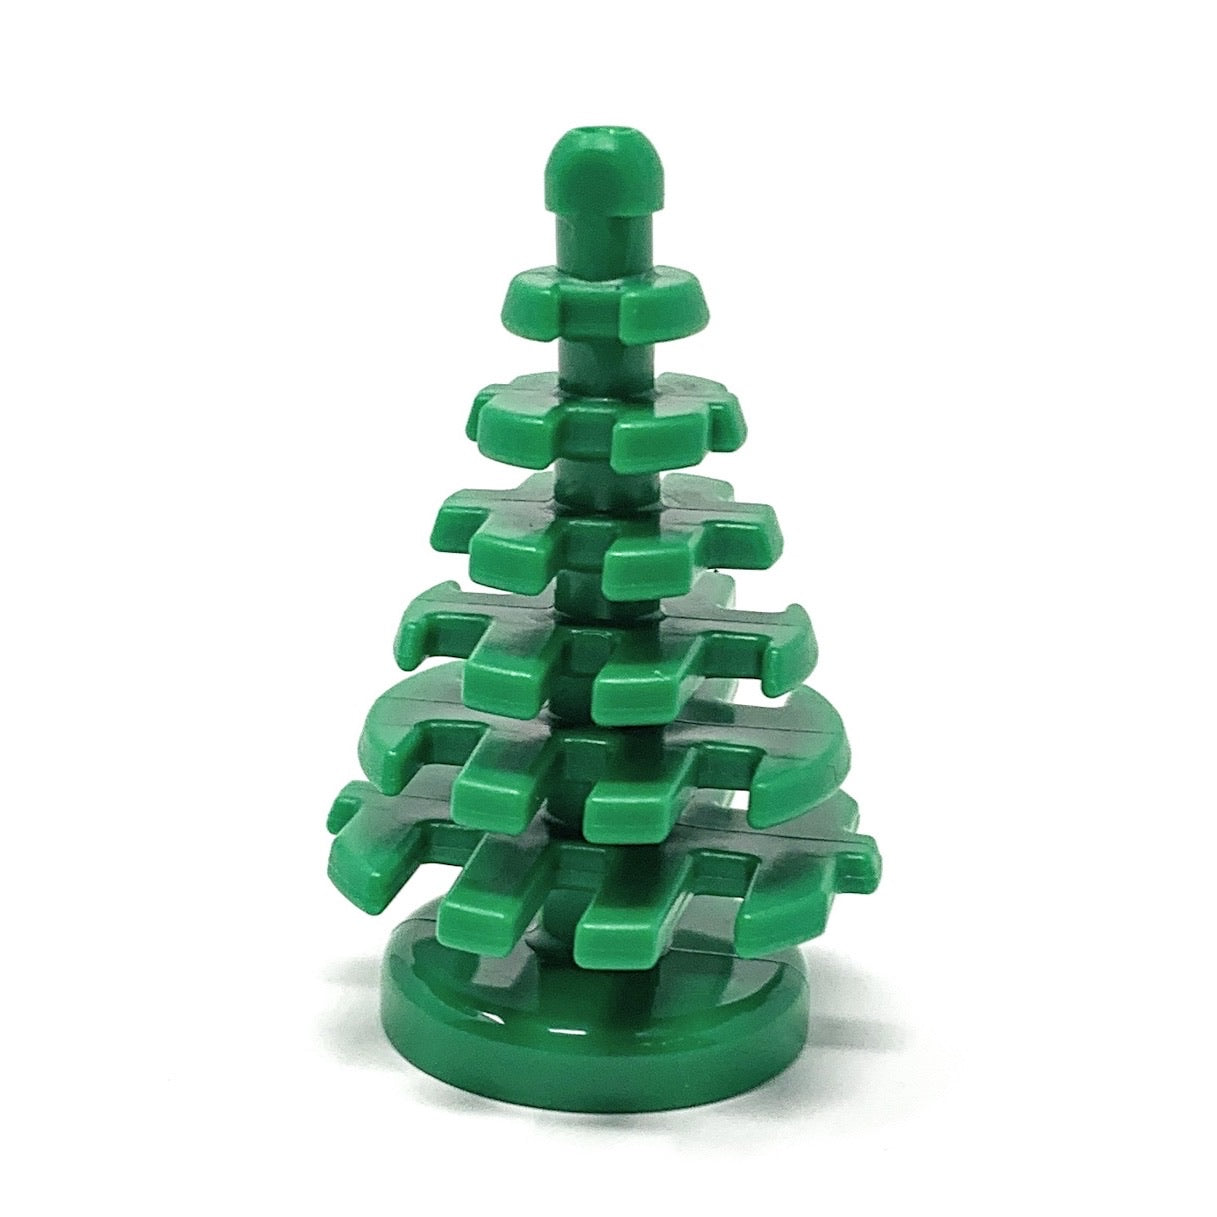 Small Pine Tree - Official LEGO® Part